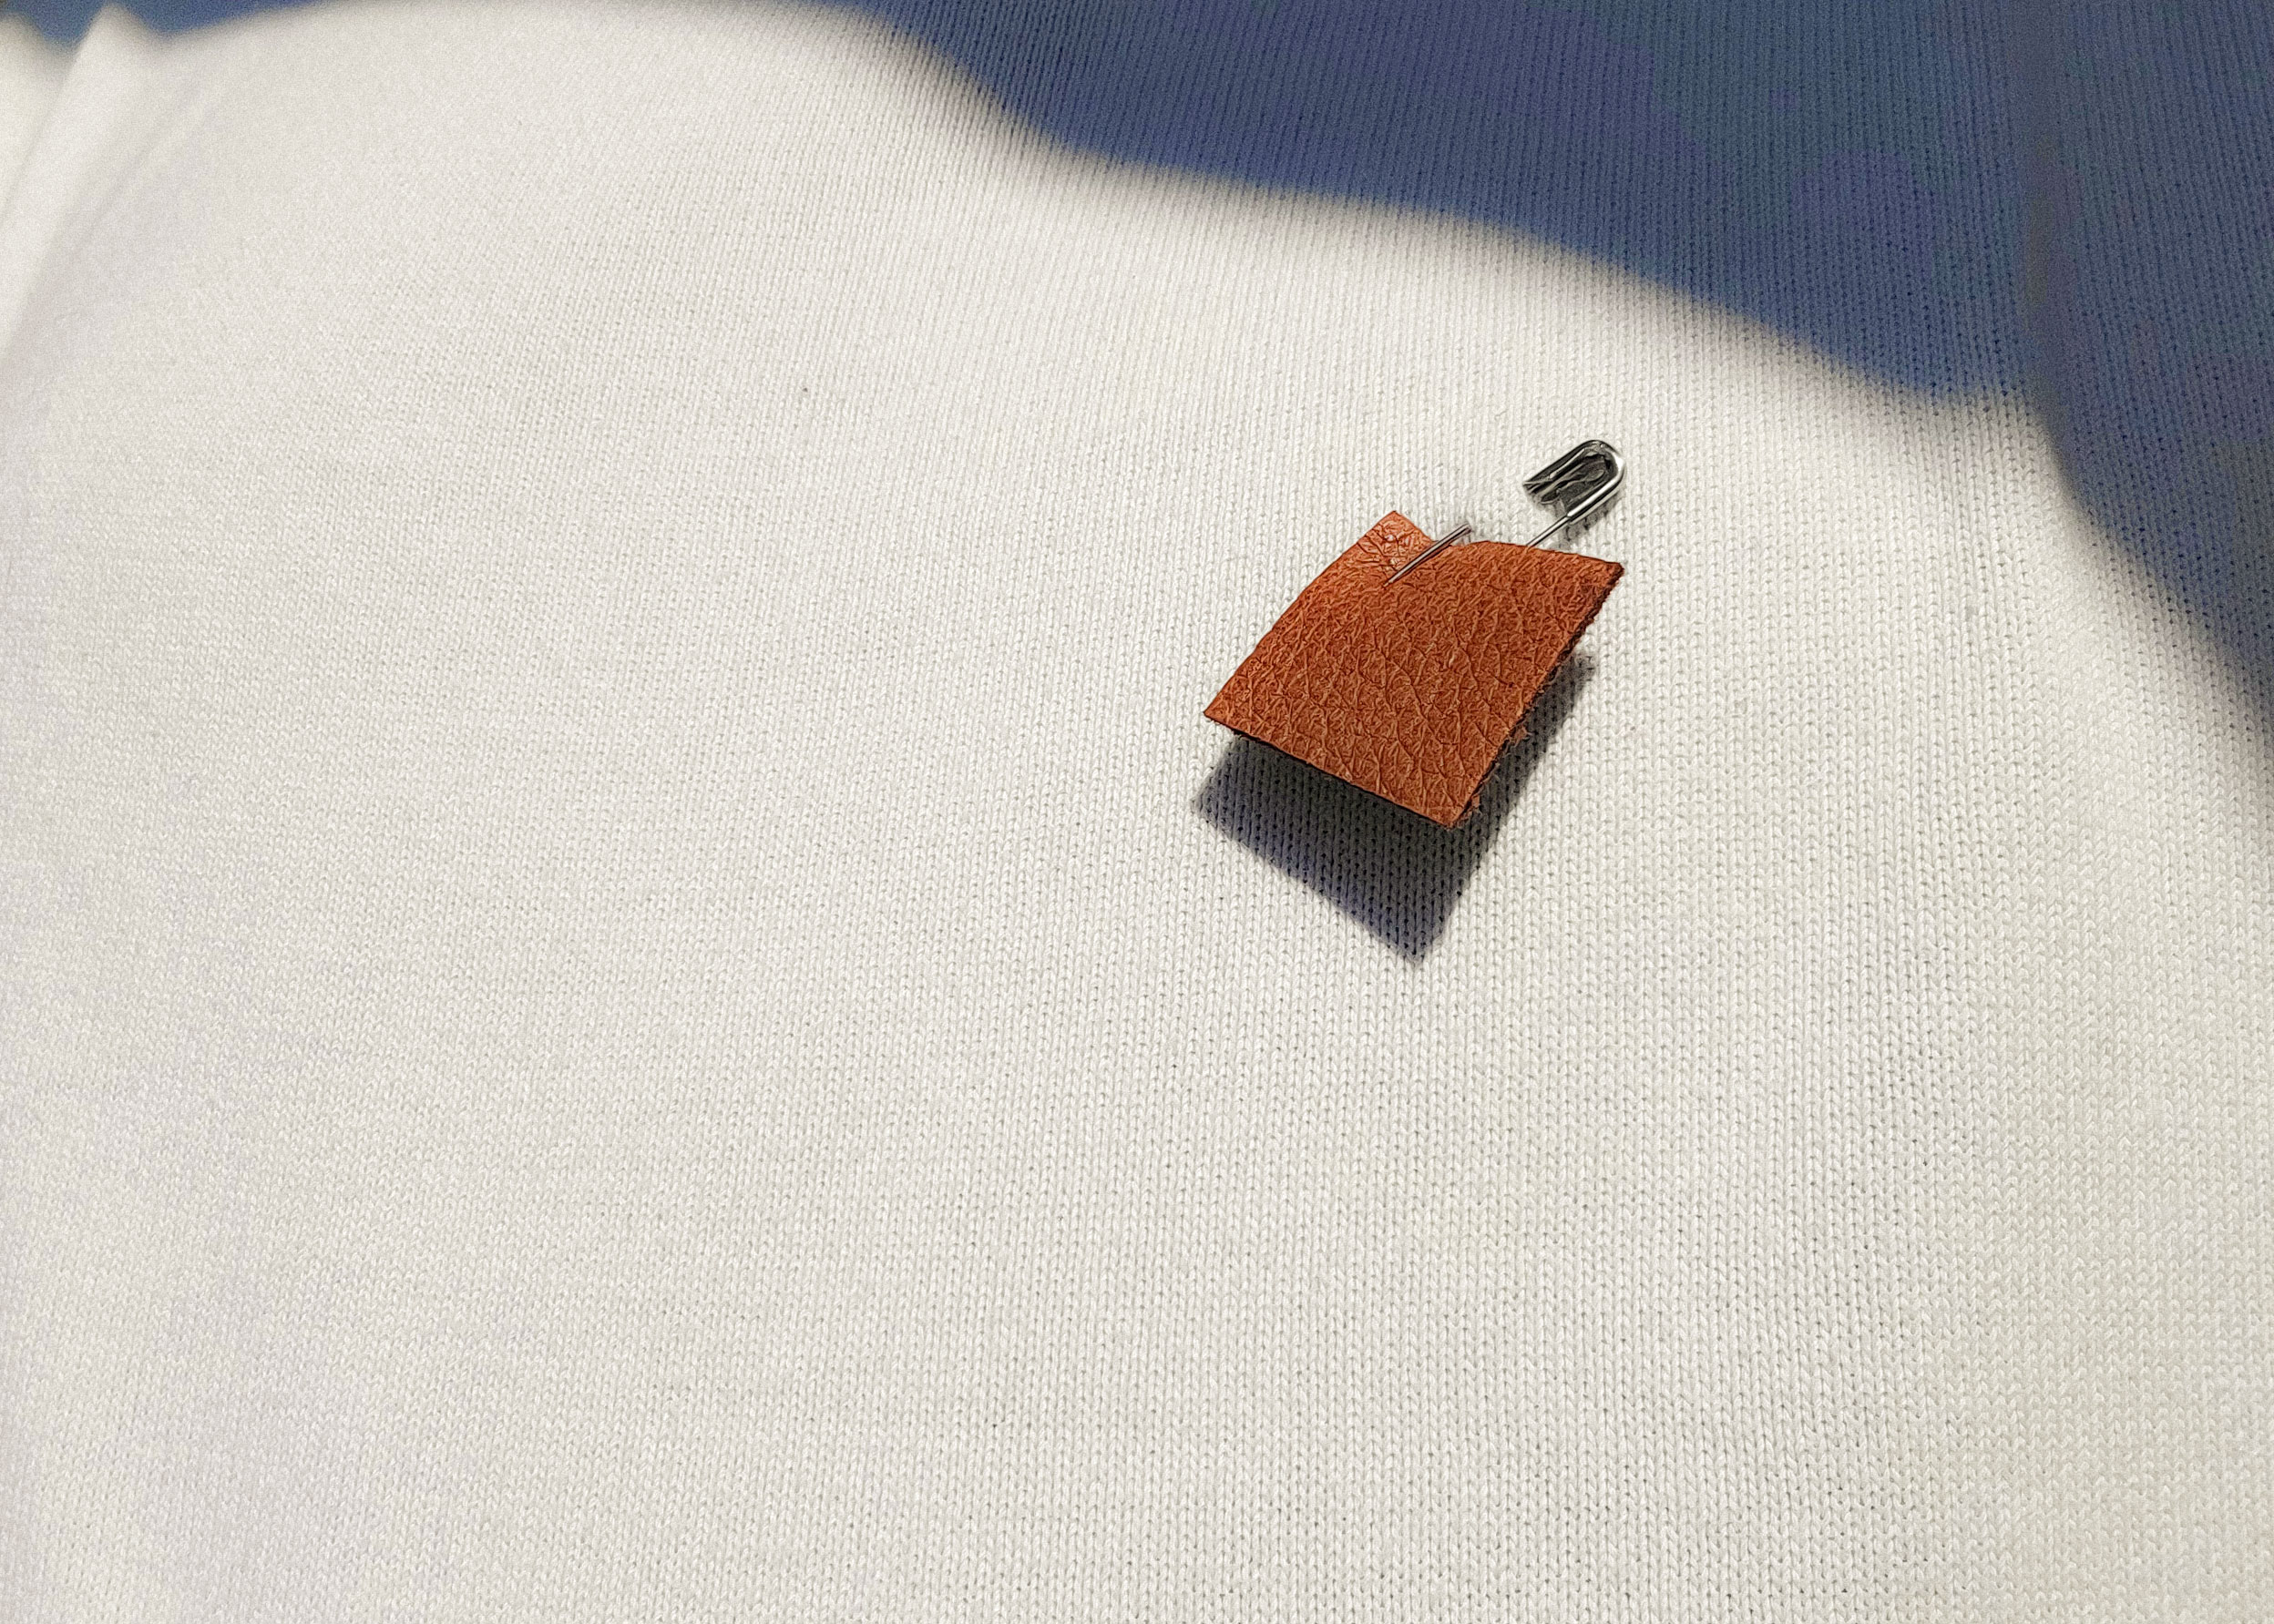 a close-up of a tan moose hide pin on a white shirt